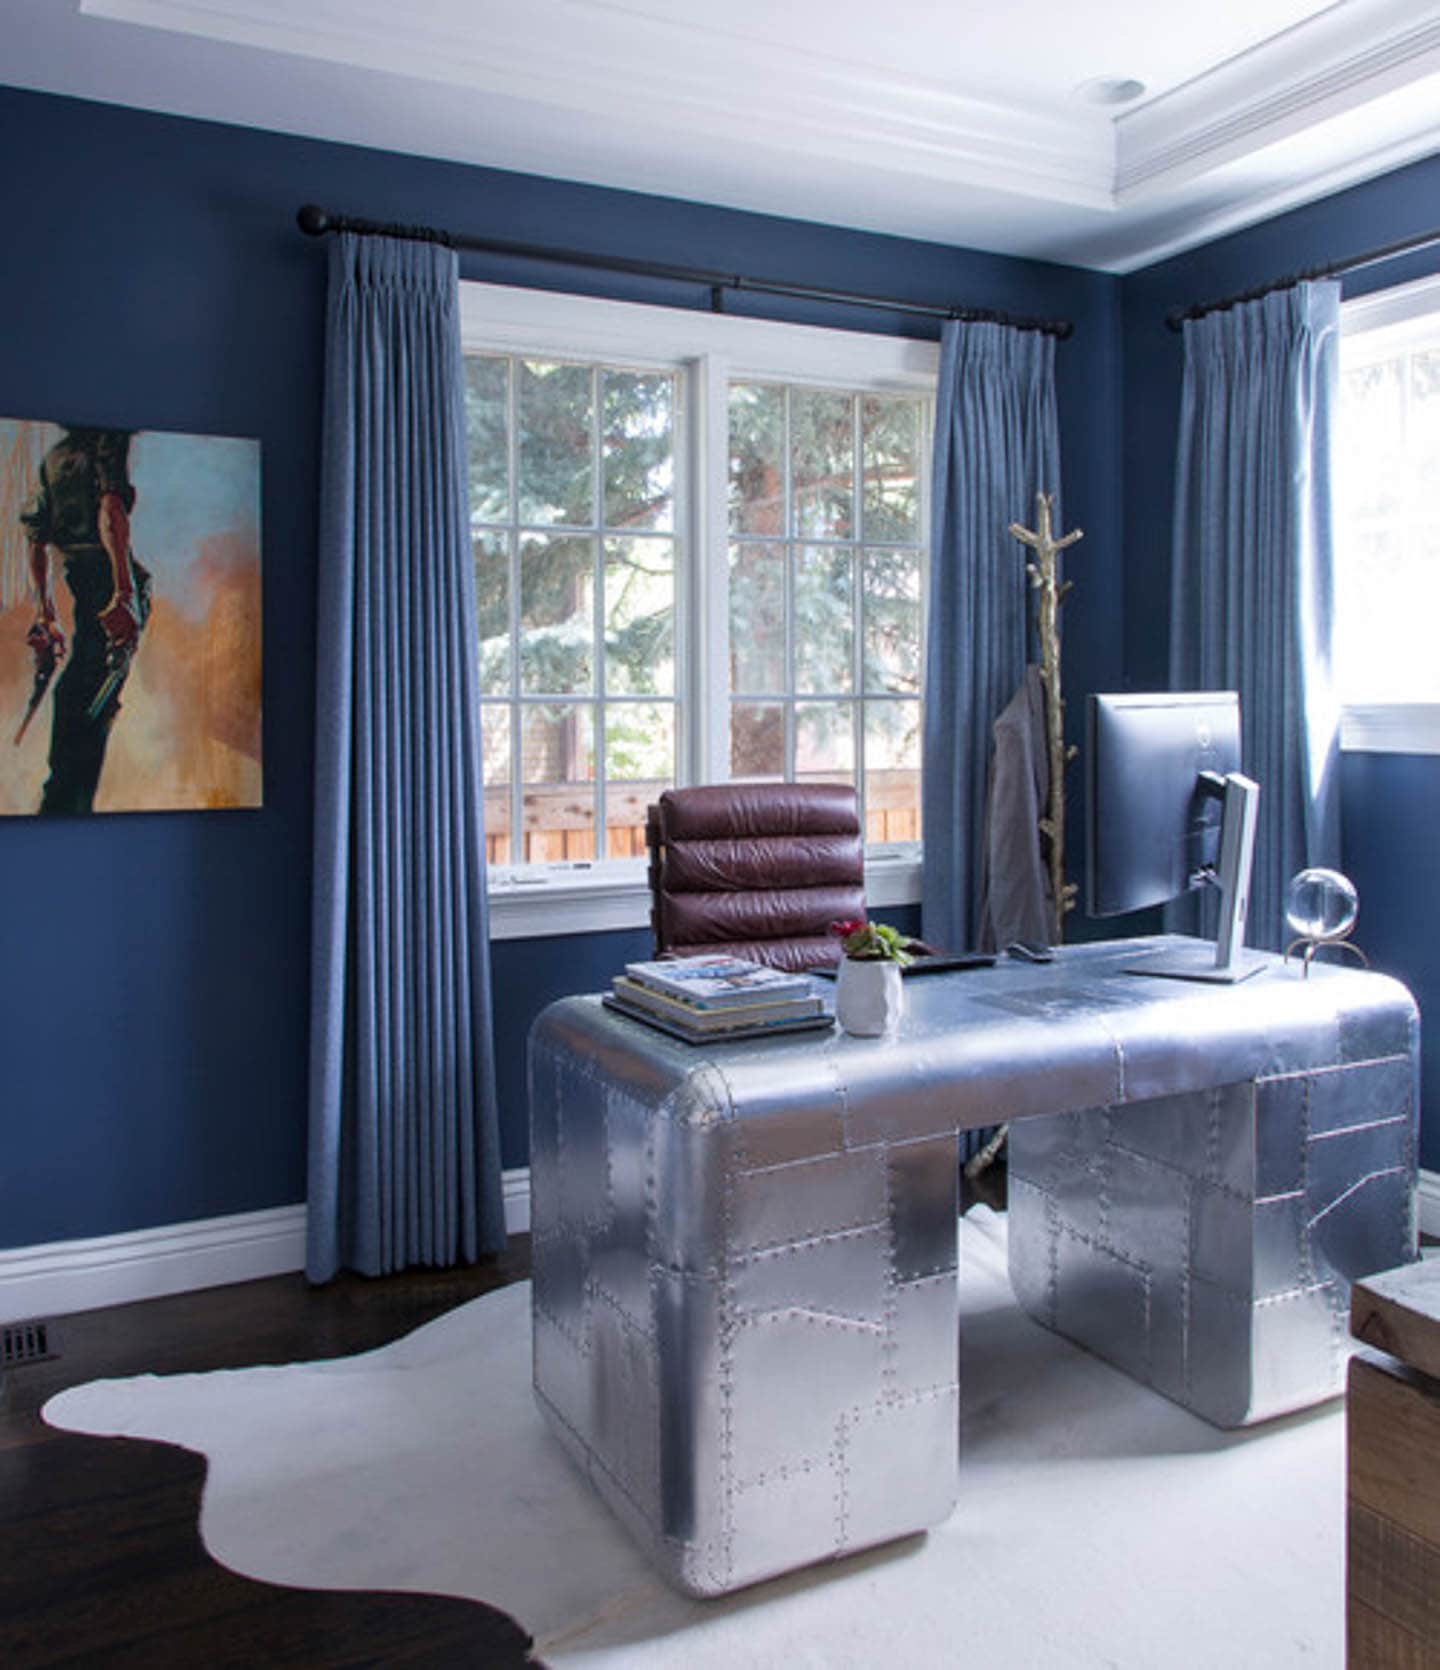 Home office with dark blue walls and curtains and a ilver riveted desk in front of a window